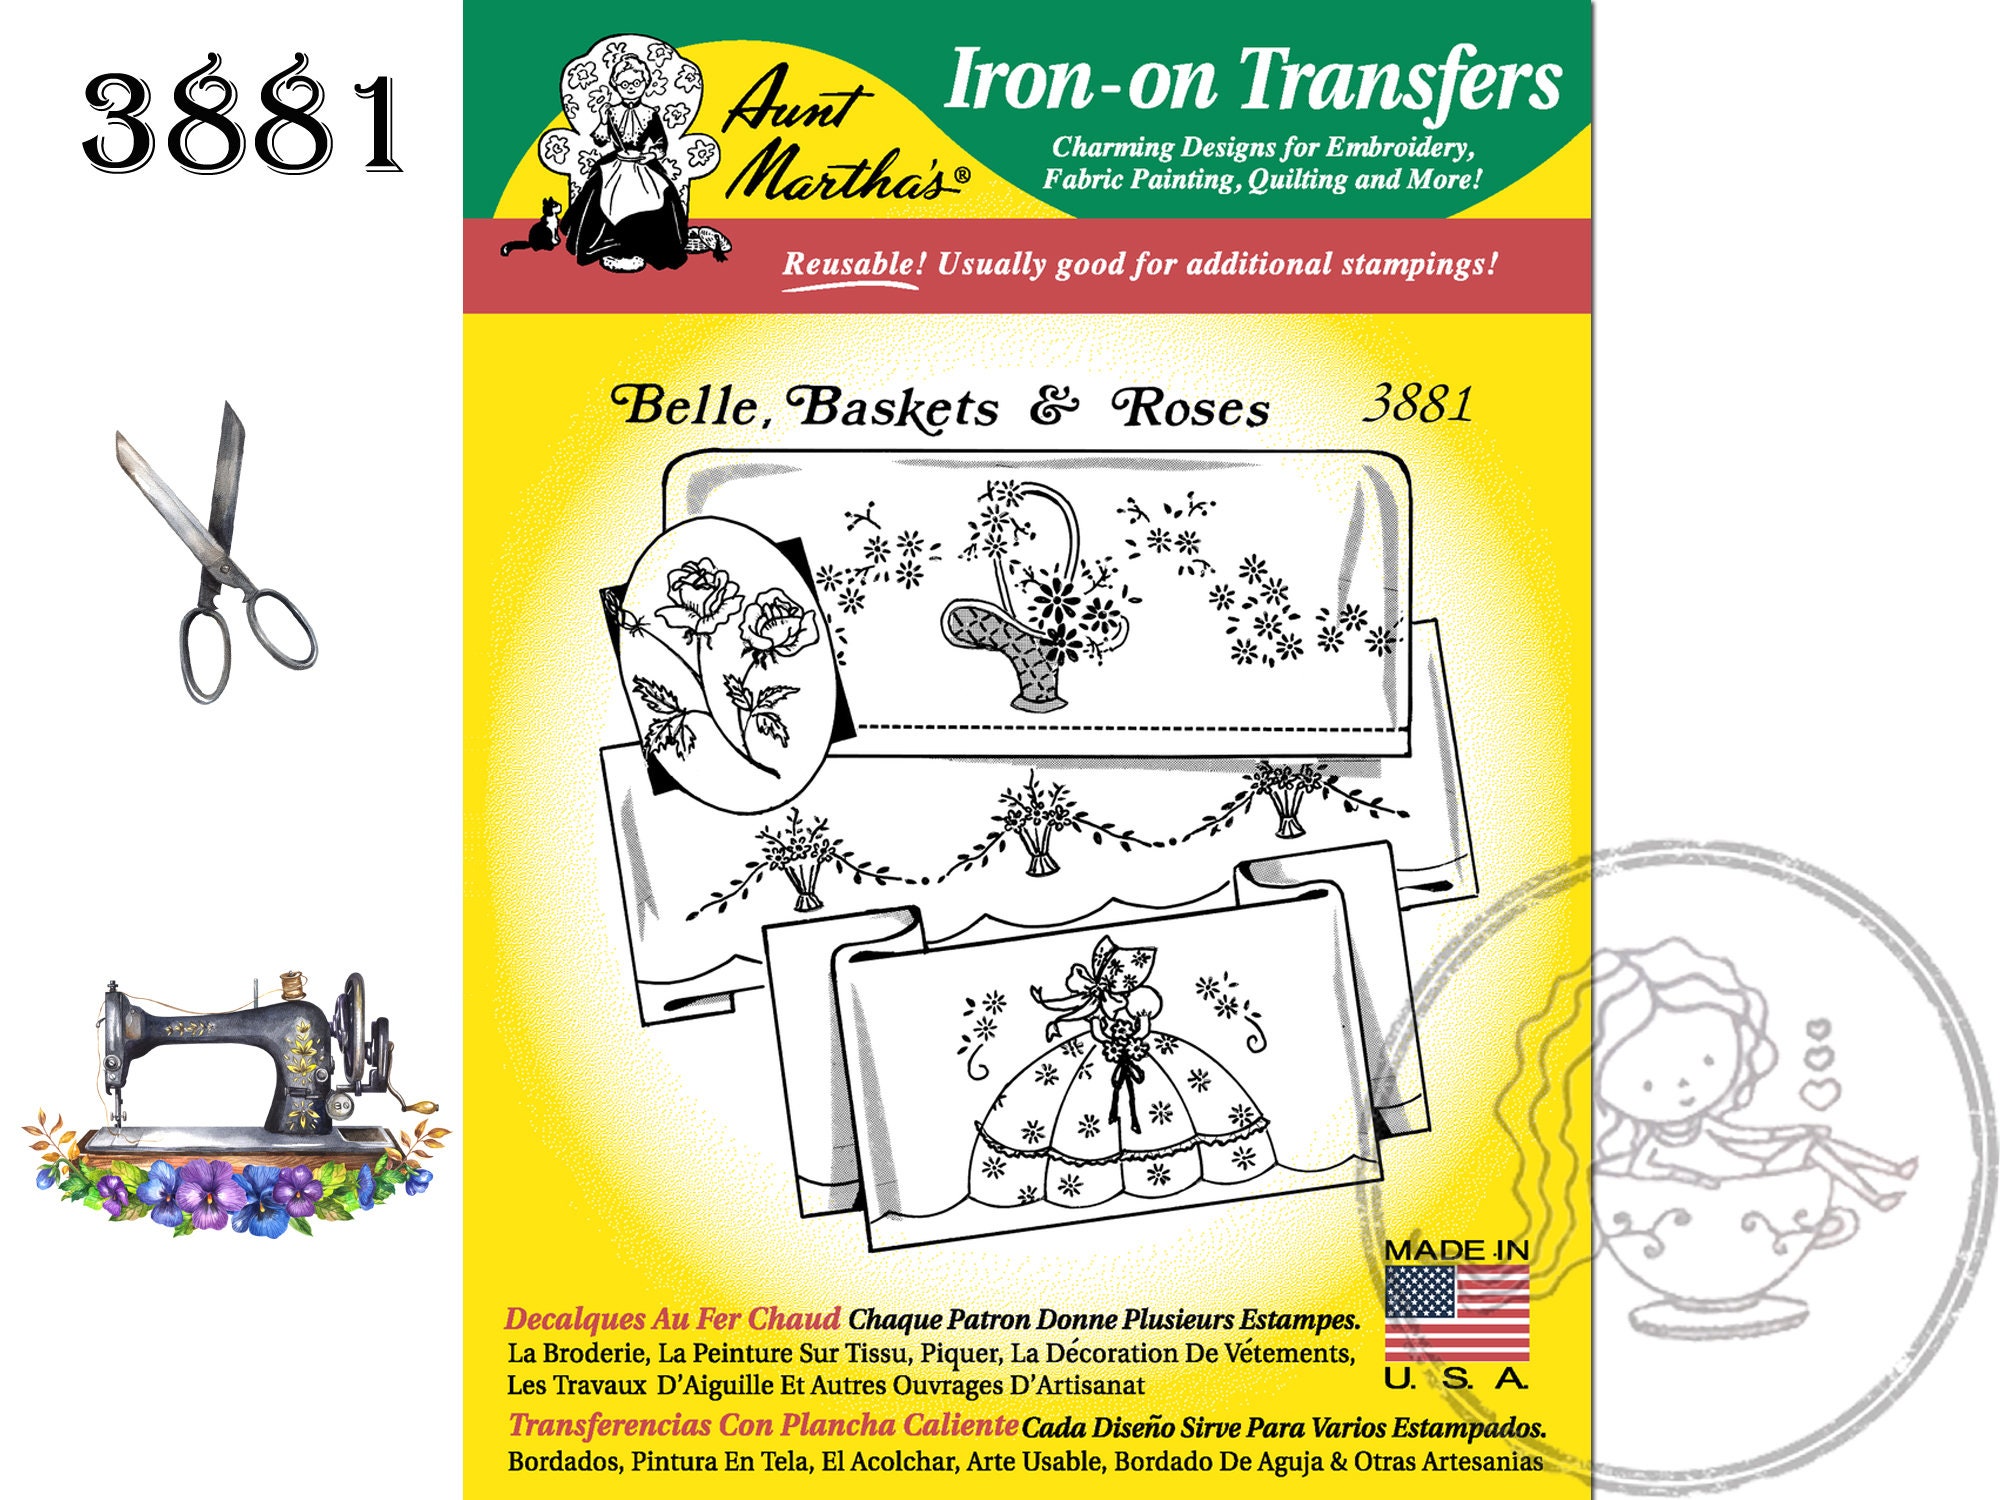 New Aunt Martha's 4036, A Slice of Pie, Transfer Pattern, Hot Iron